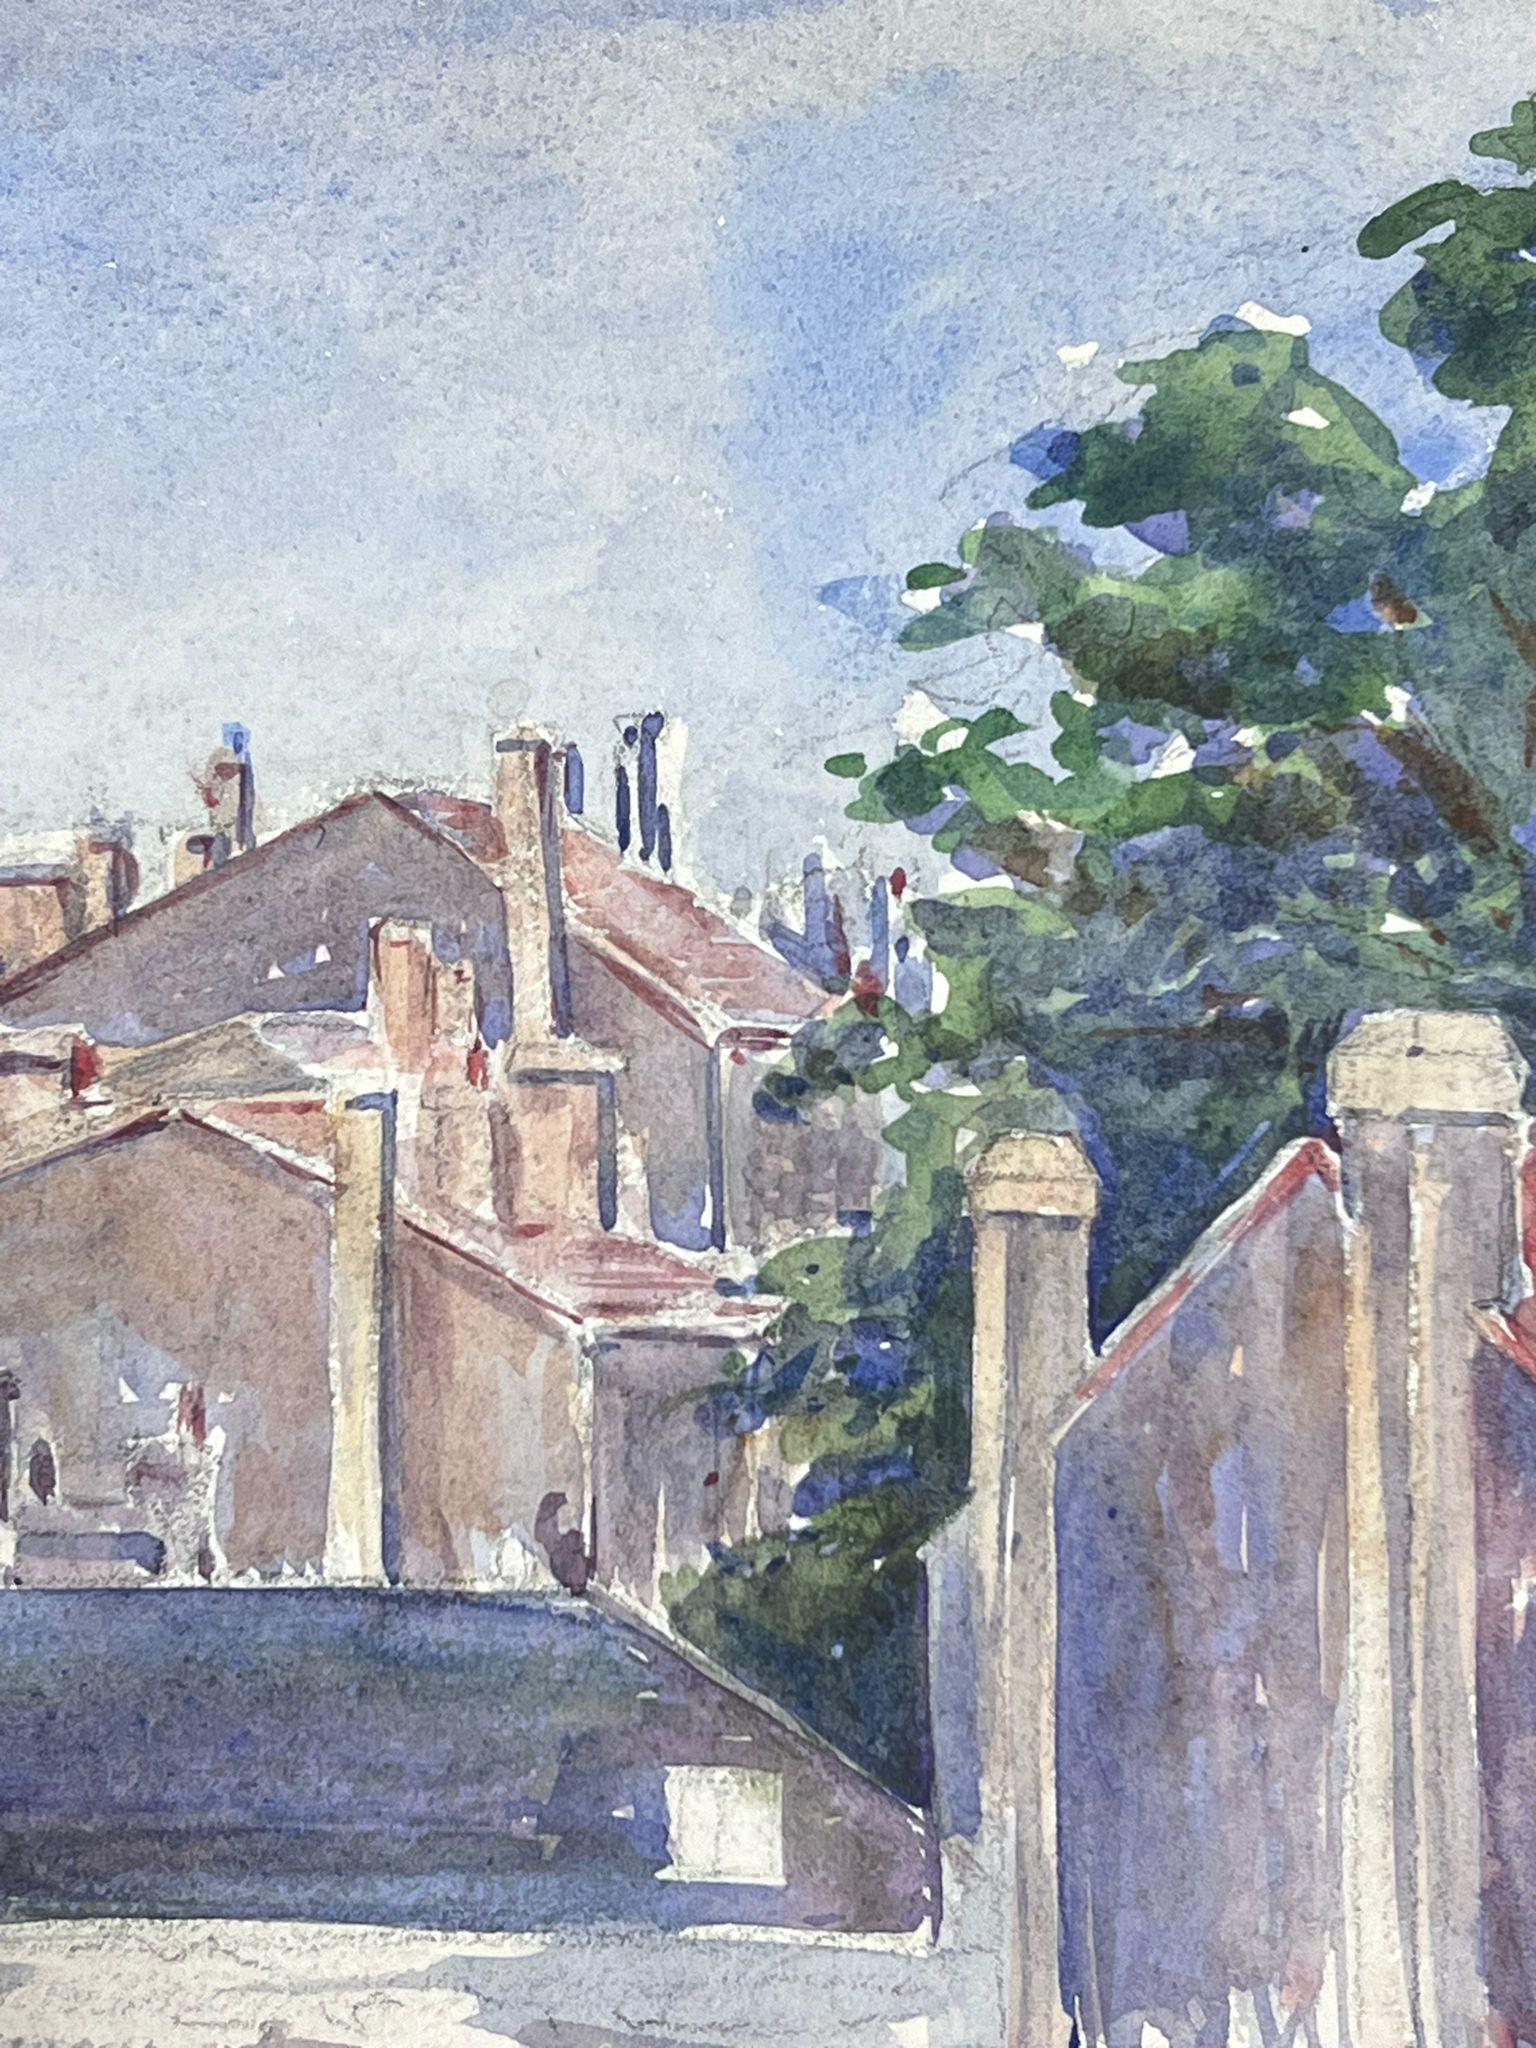 Village Roof Tops
by Louise Alix, French 1950's Impressionist 
watercolour on artist paper, unframed
painting: 7 x 8.75 inches
provenance: from a large private collection of this artists work in Northern France
condition: original, good and sound